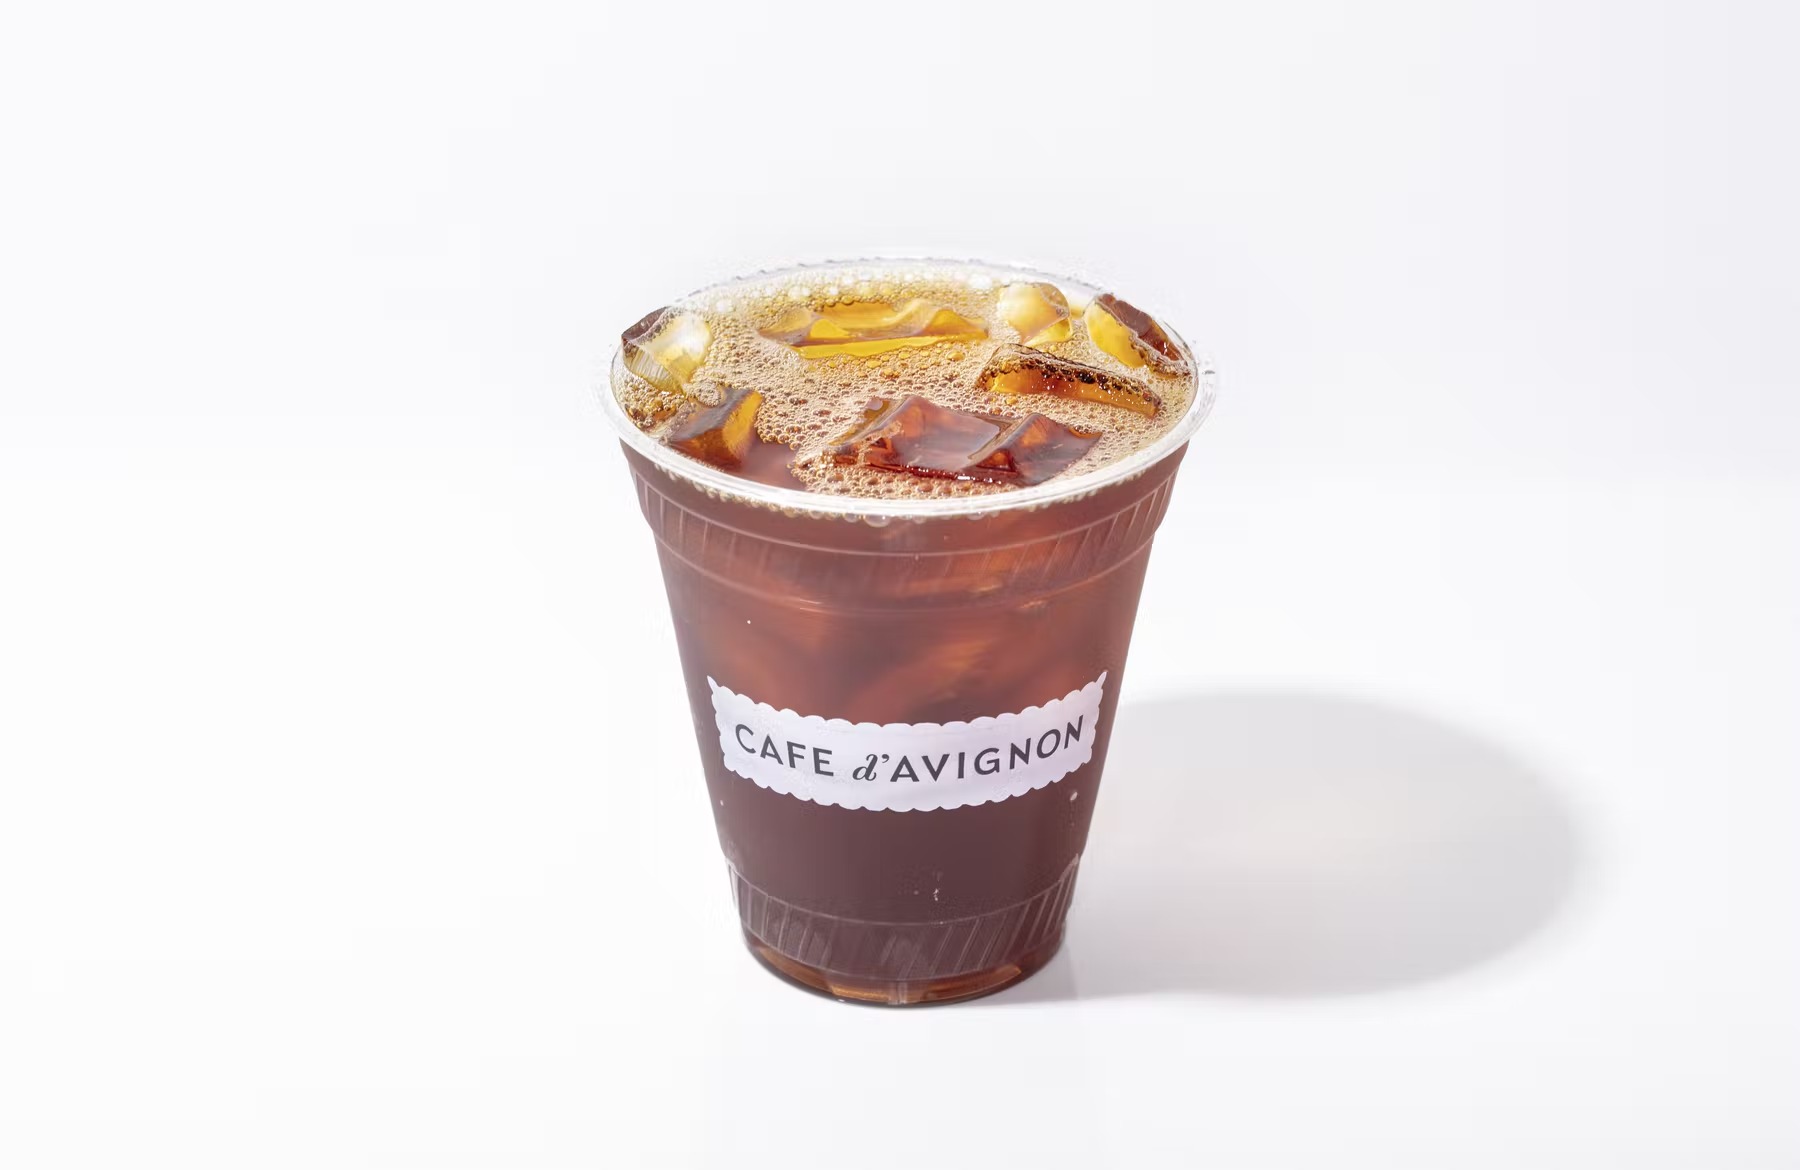 https://www.cafedavignon.com/the-moxy-times-square/wp-content/uploads/sites/4/2022/06/Cold-Brew-1.jpg